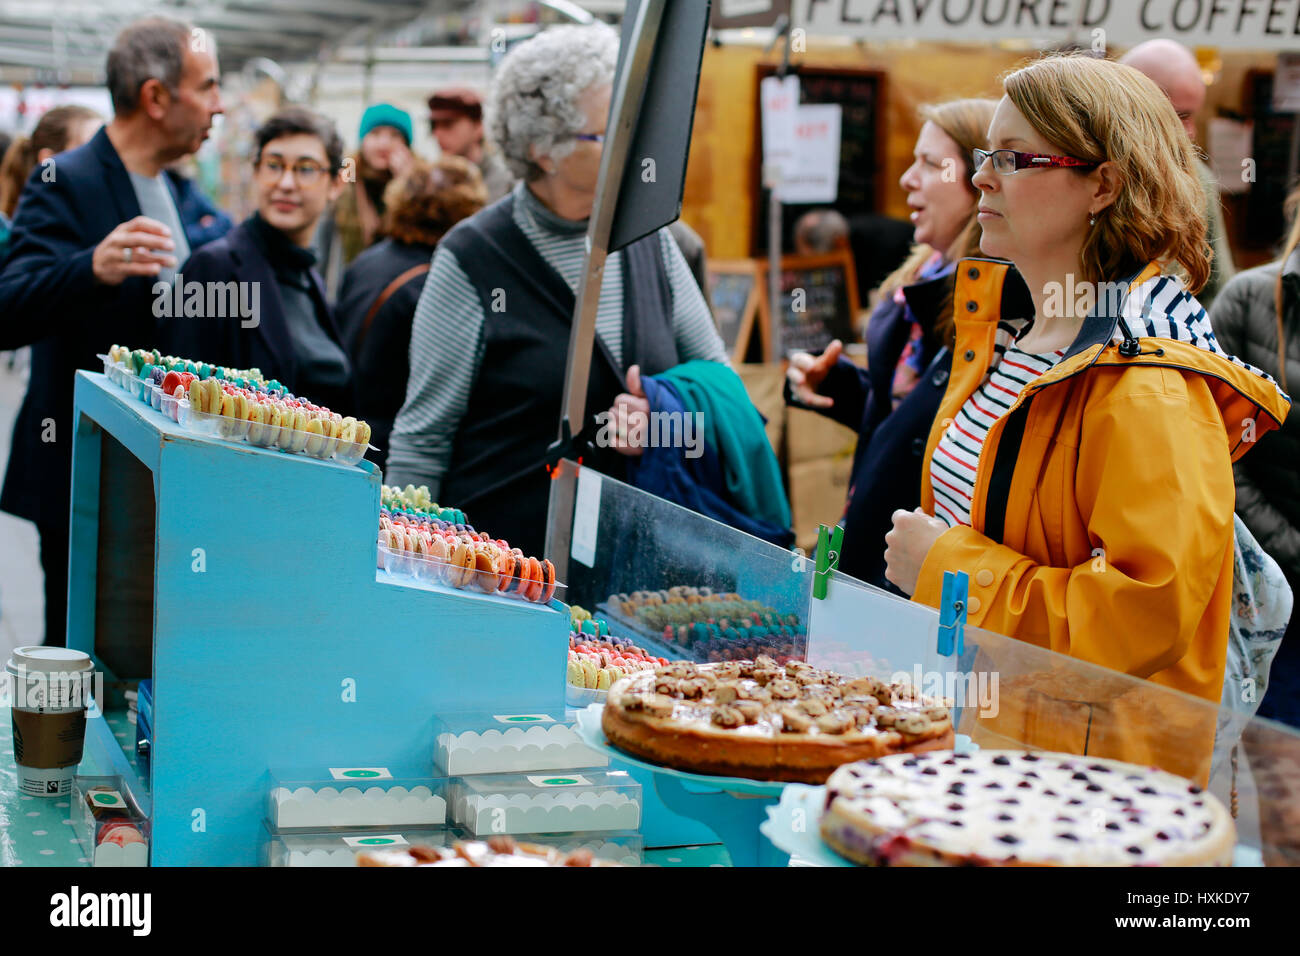 Woman looking at desserts sold on a market stall in Greenwich Market, London's only market set within a World Heritage Site. Stock Photo